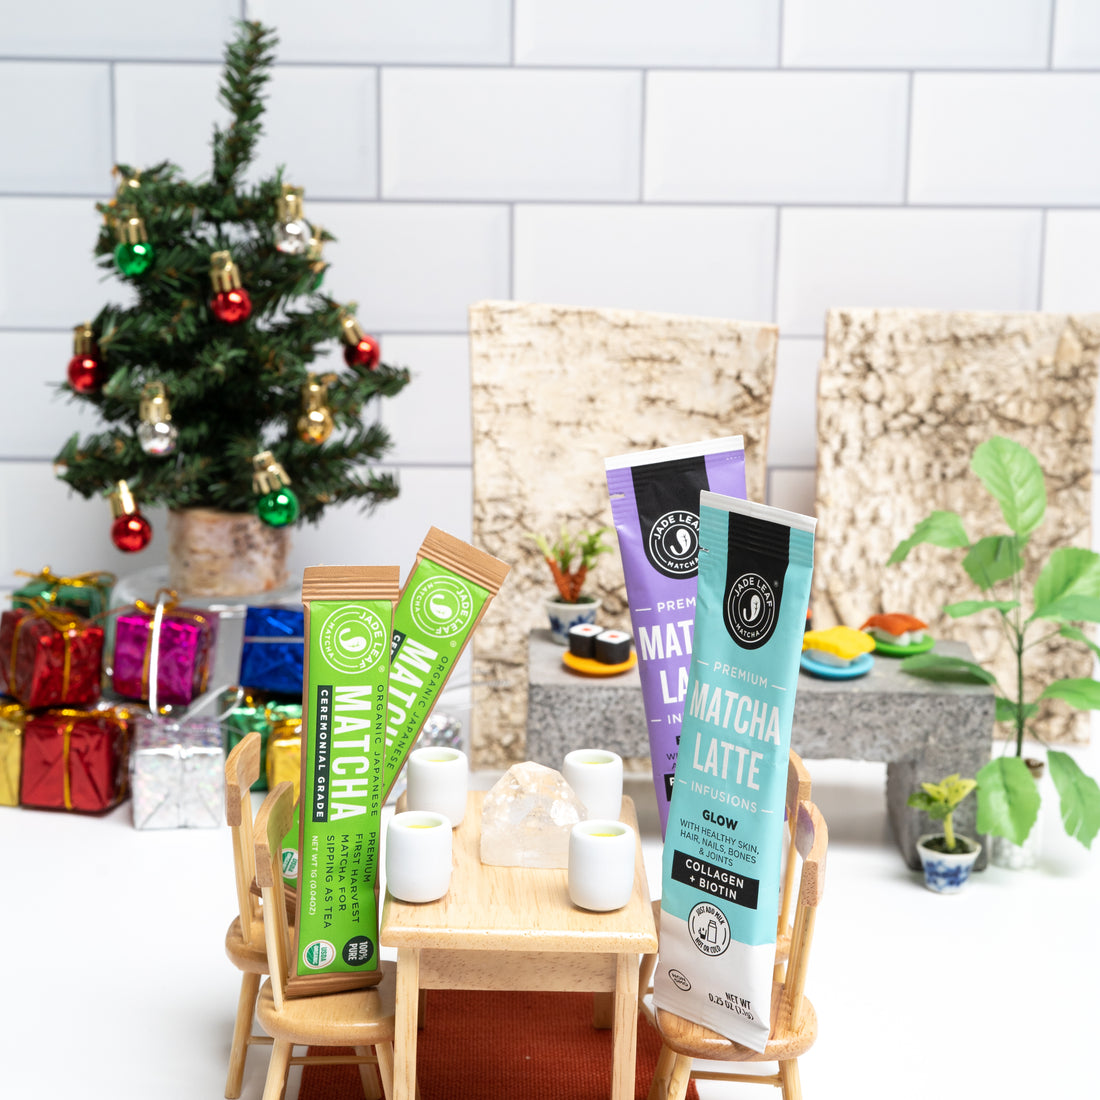 Holiday must-haves for the matcha bae in your life!